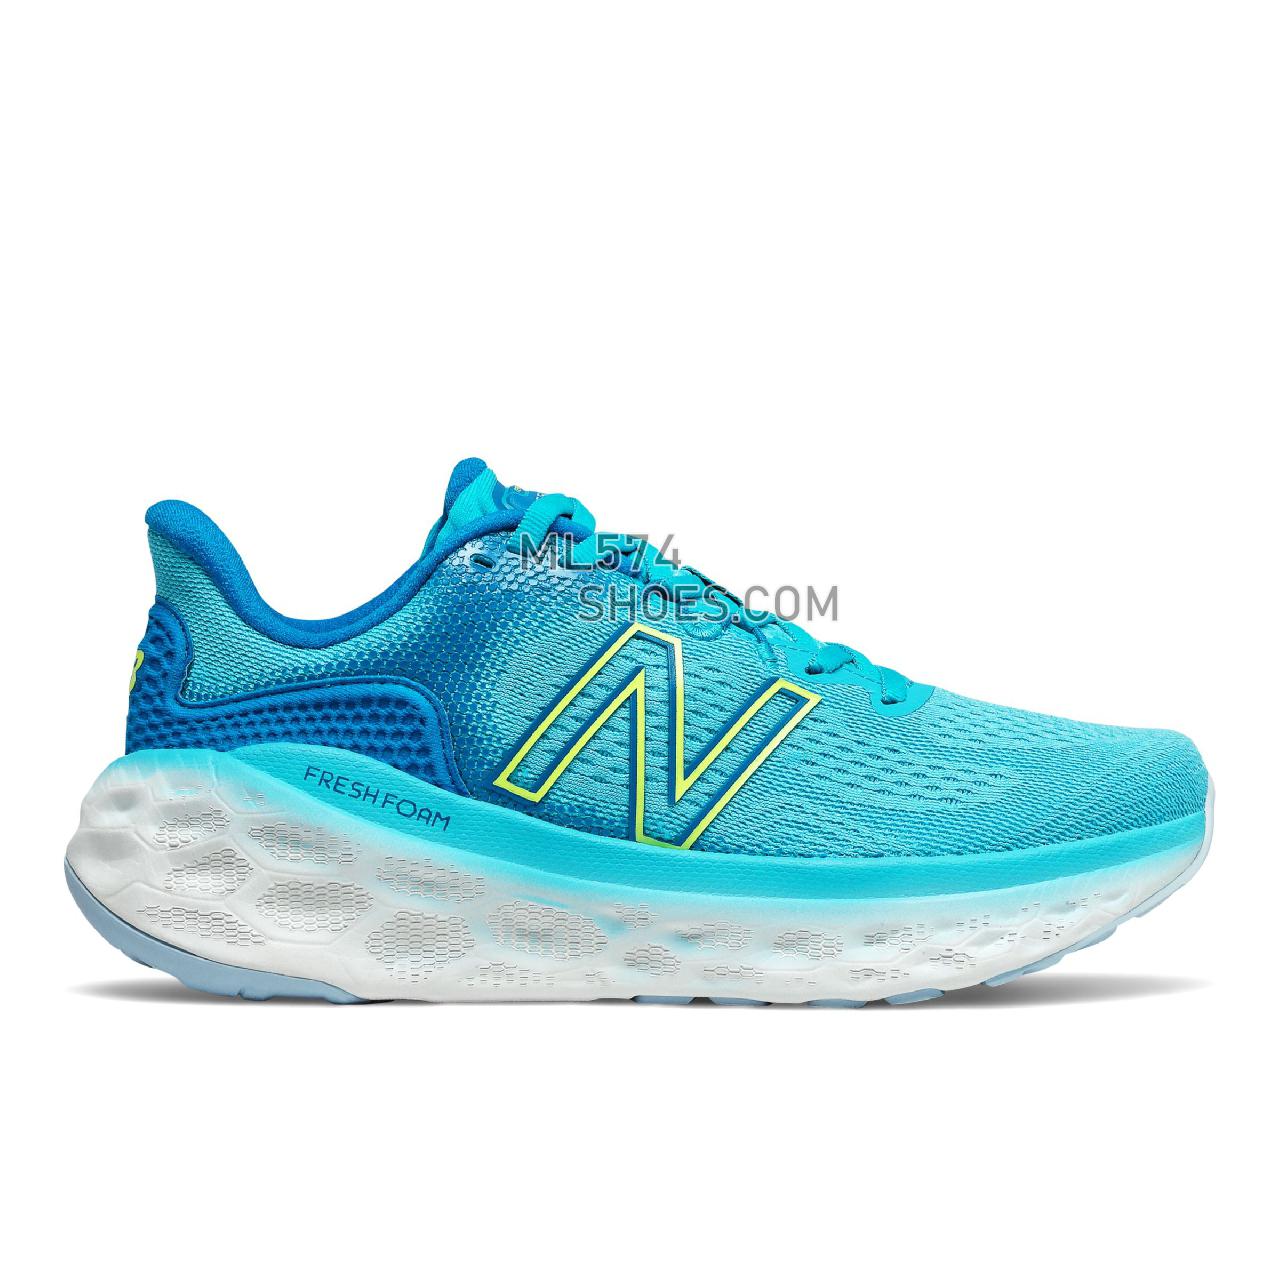 New Balance Fresh Foam More v3 - Women's Neutral Running - Virtual sky with bleached lime glo and star glo - WMORLV3